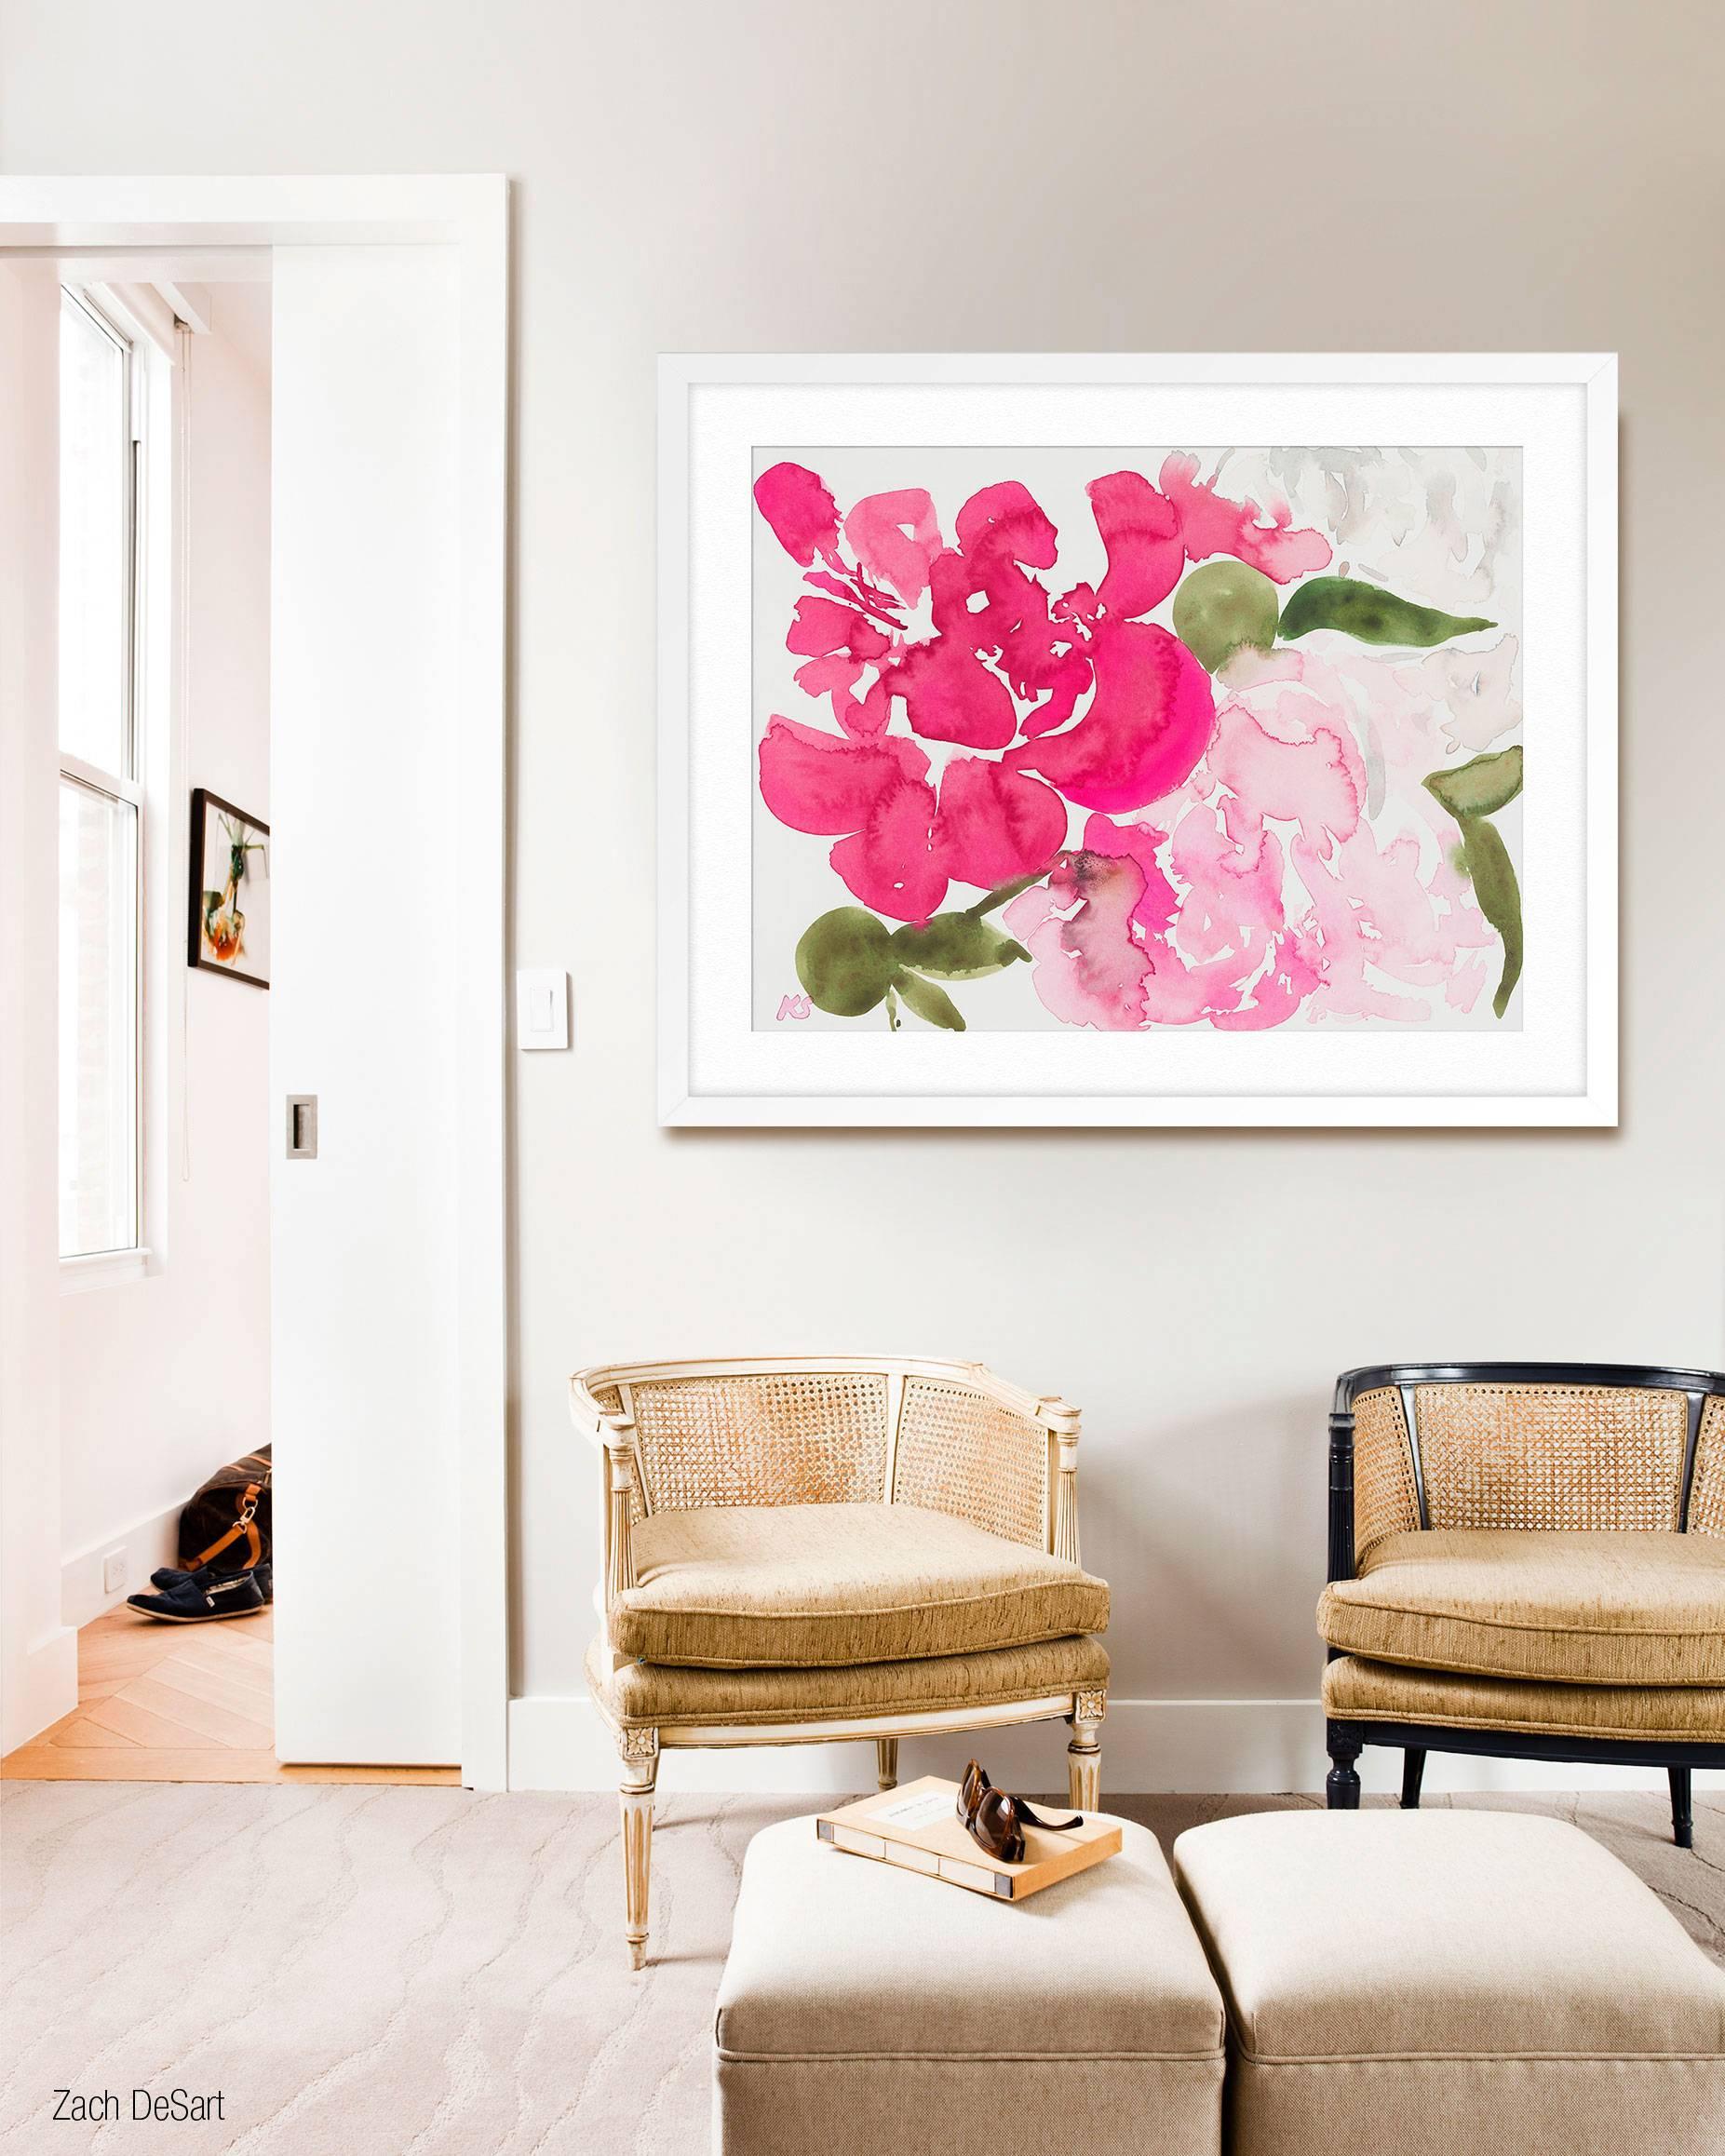 ABOUT THIS PIECE: Peonies was created as a special collaboration with domino Magazine. Kate's New York apartment was featured in the Spring 2016 issue of domino. She created Peonies for her living room and our gallery produced a limited edition